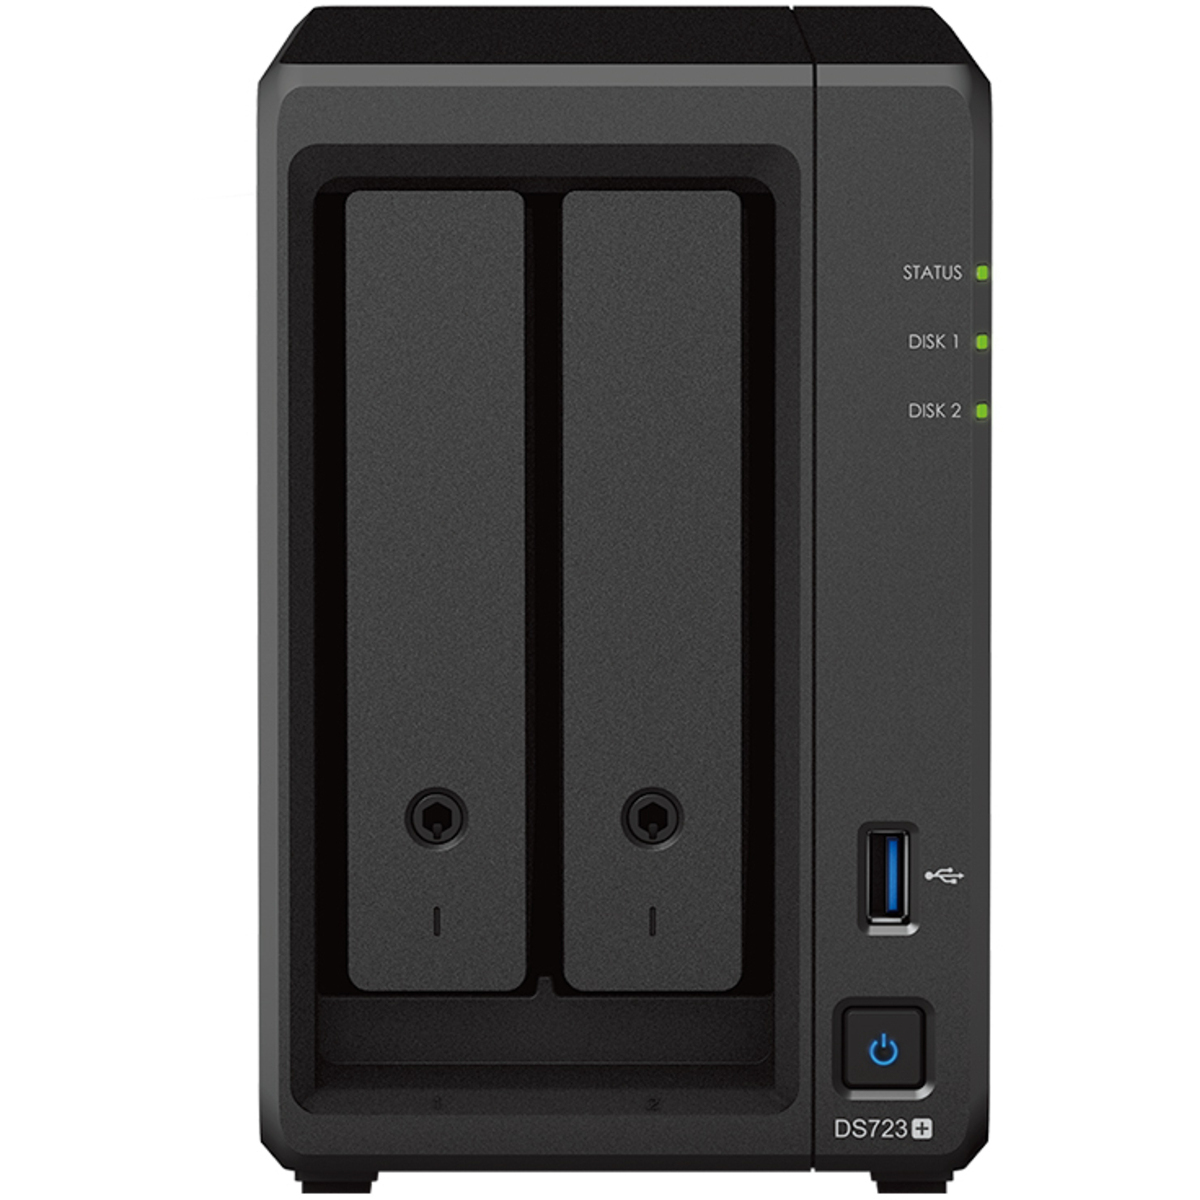 Synology DiskStation DS723+ 16tb 2-Bay Desktop Multimedia / Power User / Business NAS - Network Attached Storage Device 2x8tb Samsung 870 QVO MZ-77Q8T0 2.5 560/530MB/s SATA 6Gb/s SSD CONSUMER Class Drives Installed - Burn-In Tested DiskStation DS723+